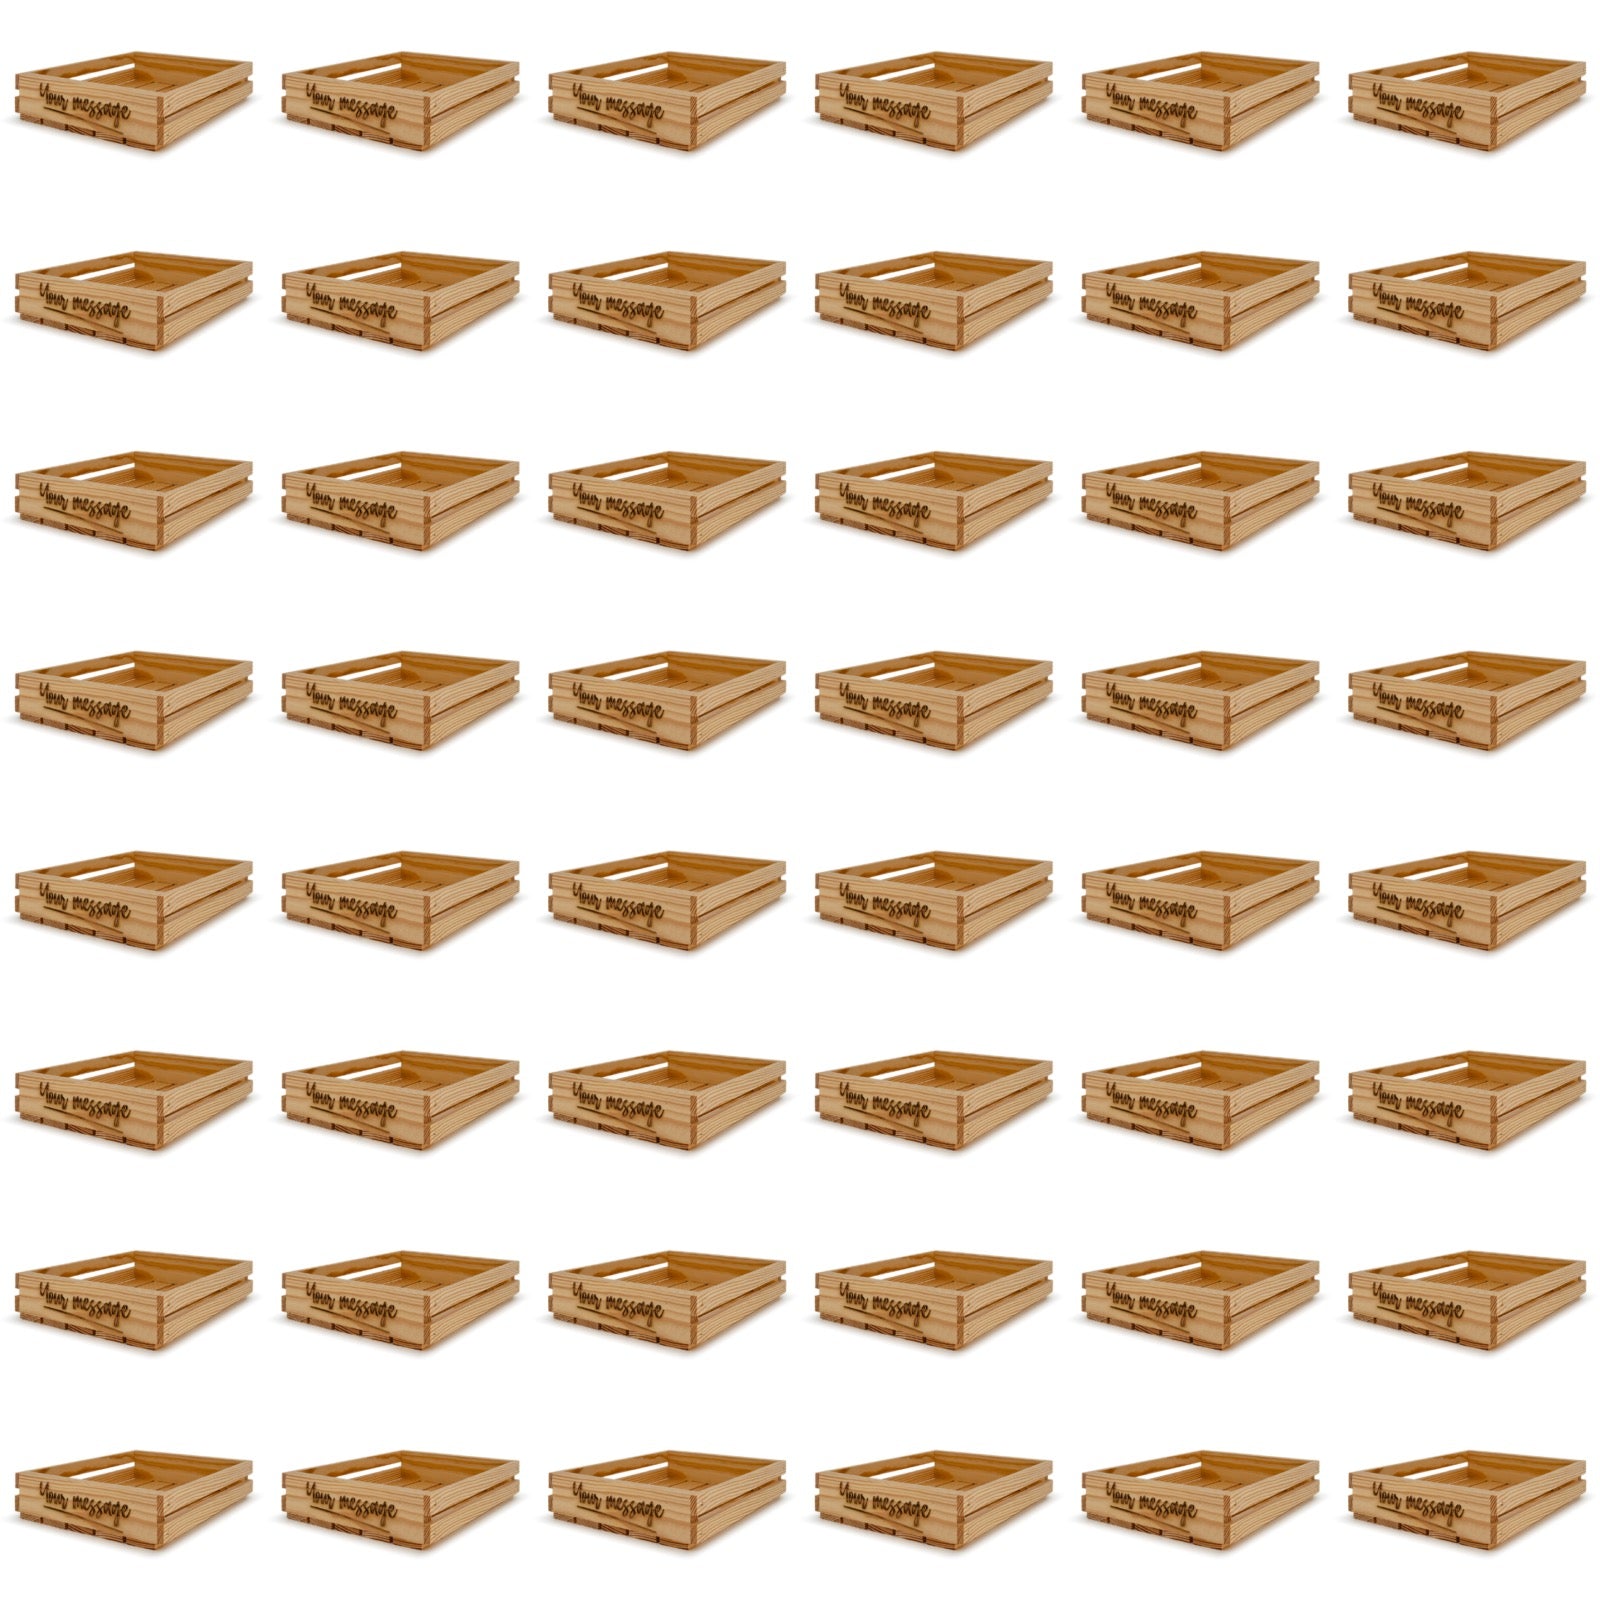 48 Small wooden crates 12x10x2.5 your message included